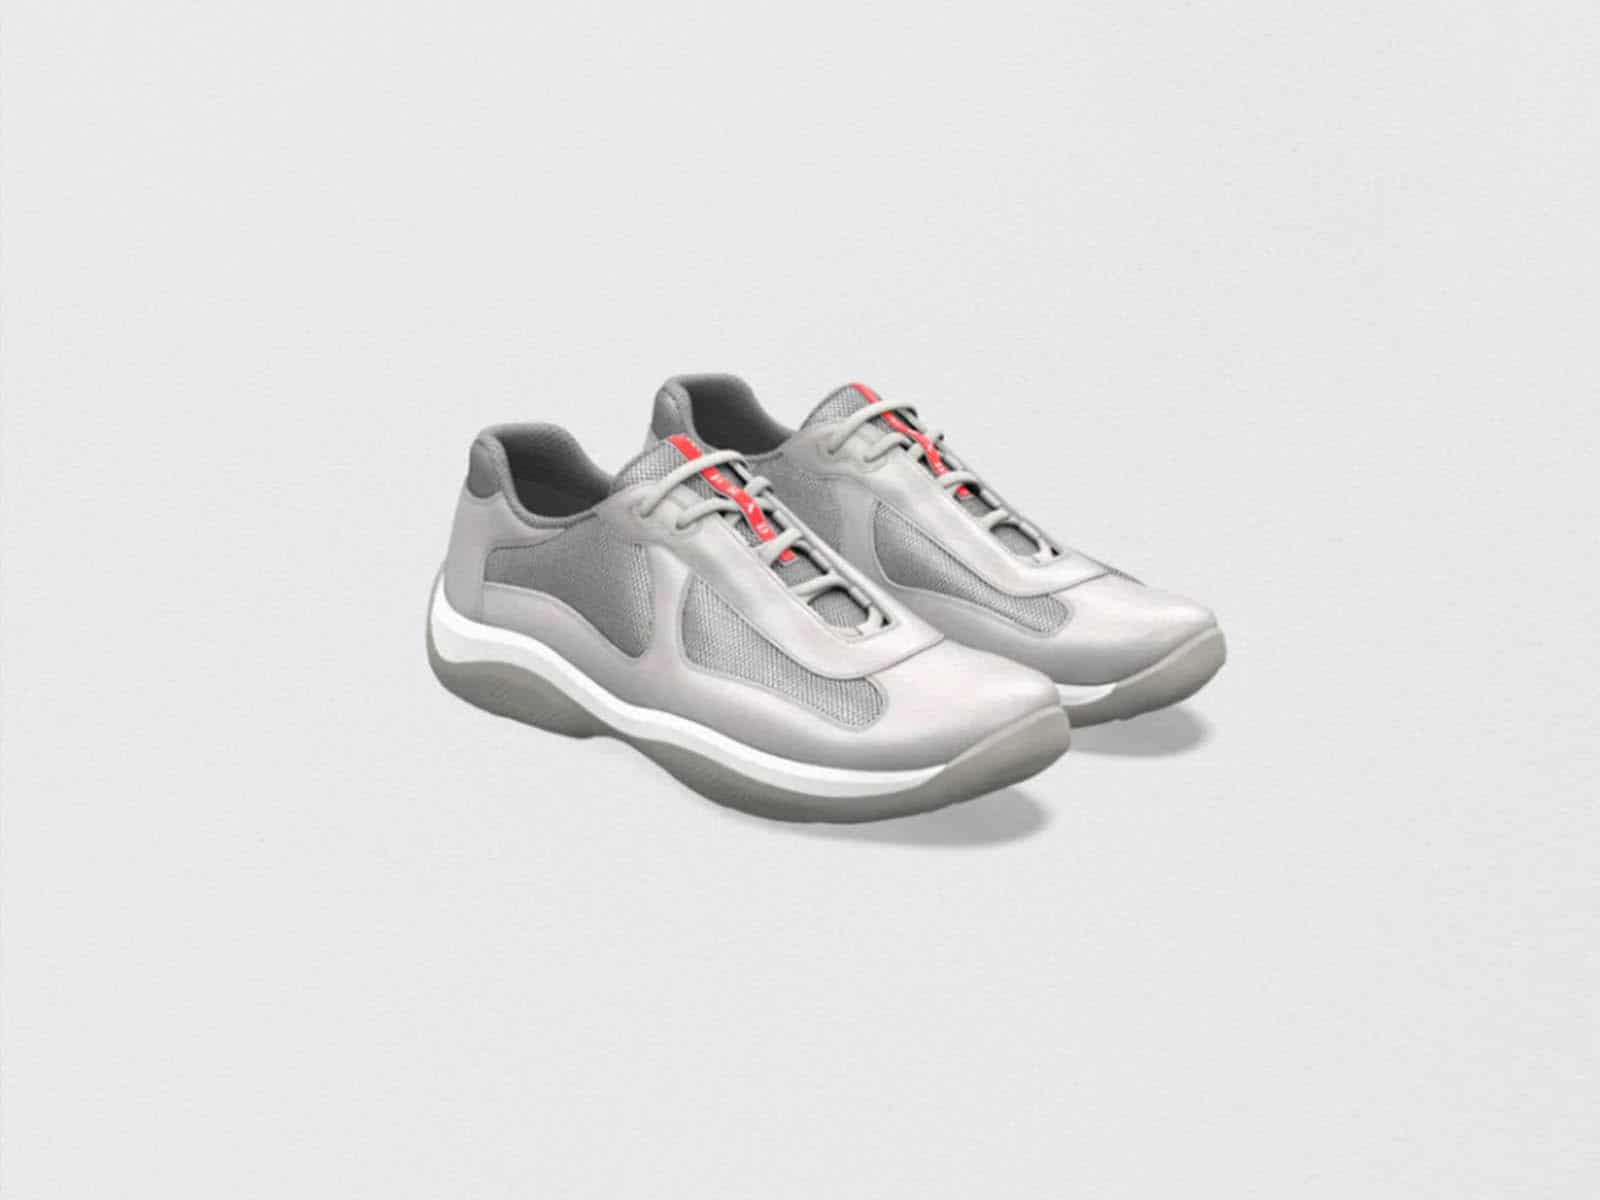 Create your own version of the Prada America’s Cup trainers